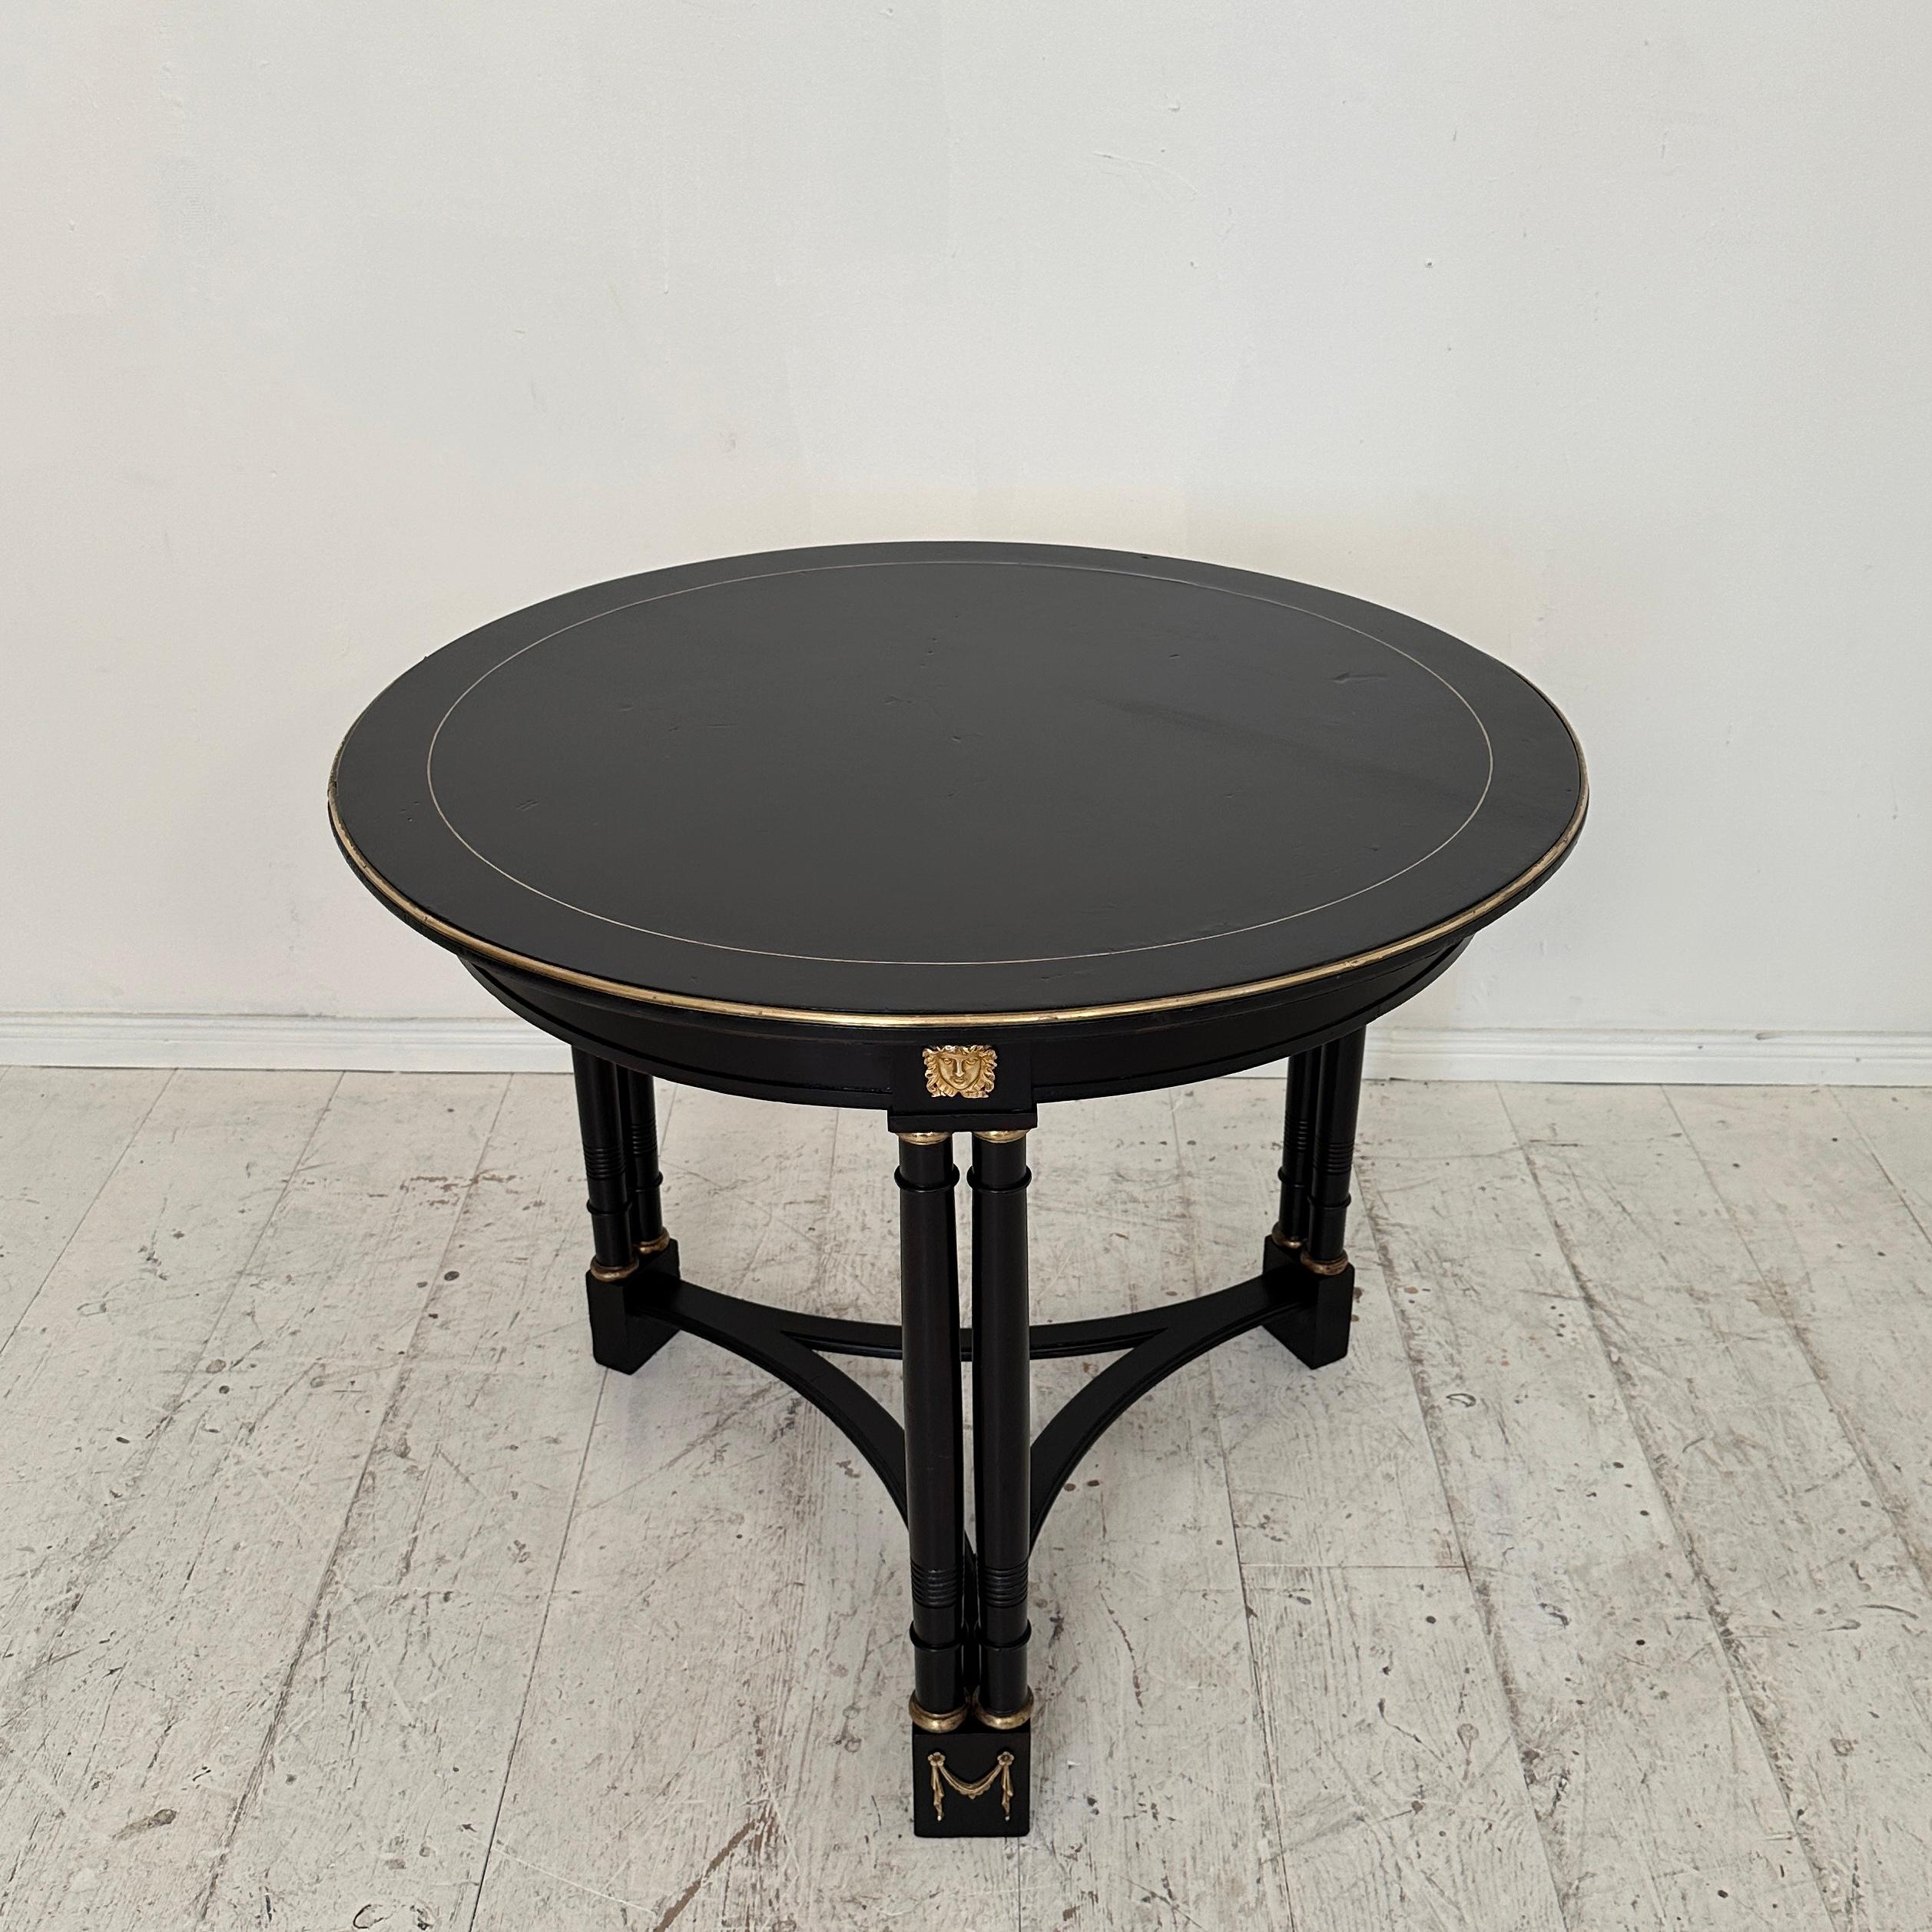 19th Century Black Round Gueridon Empire Style Table, around 1870 In Good Condition For Sale In Berlin, DE